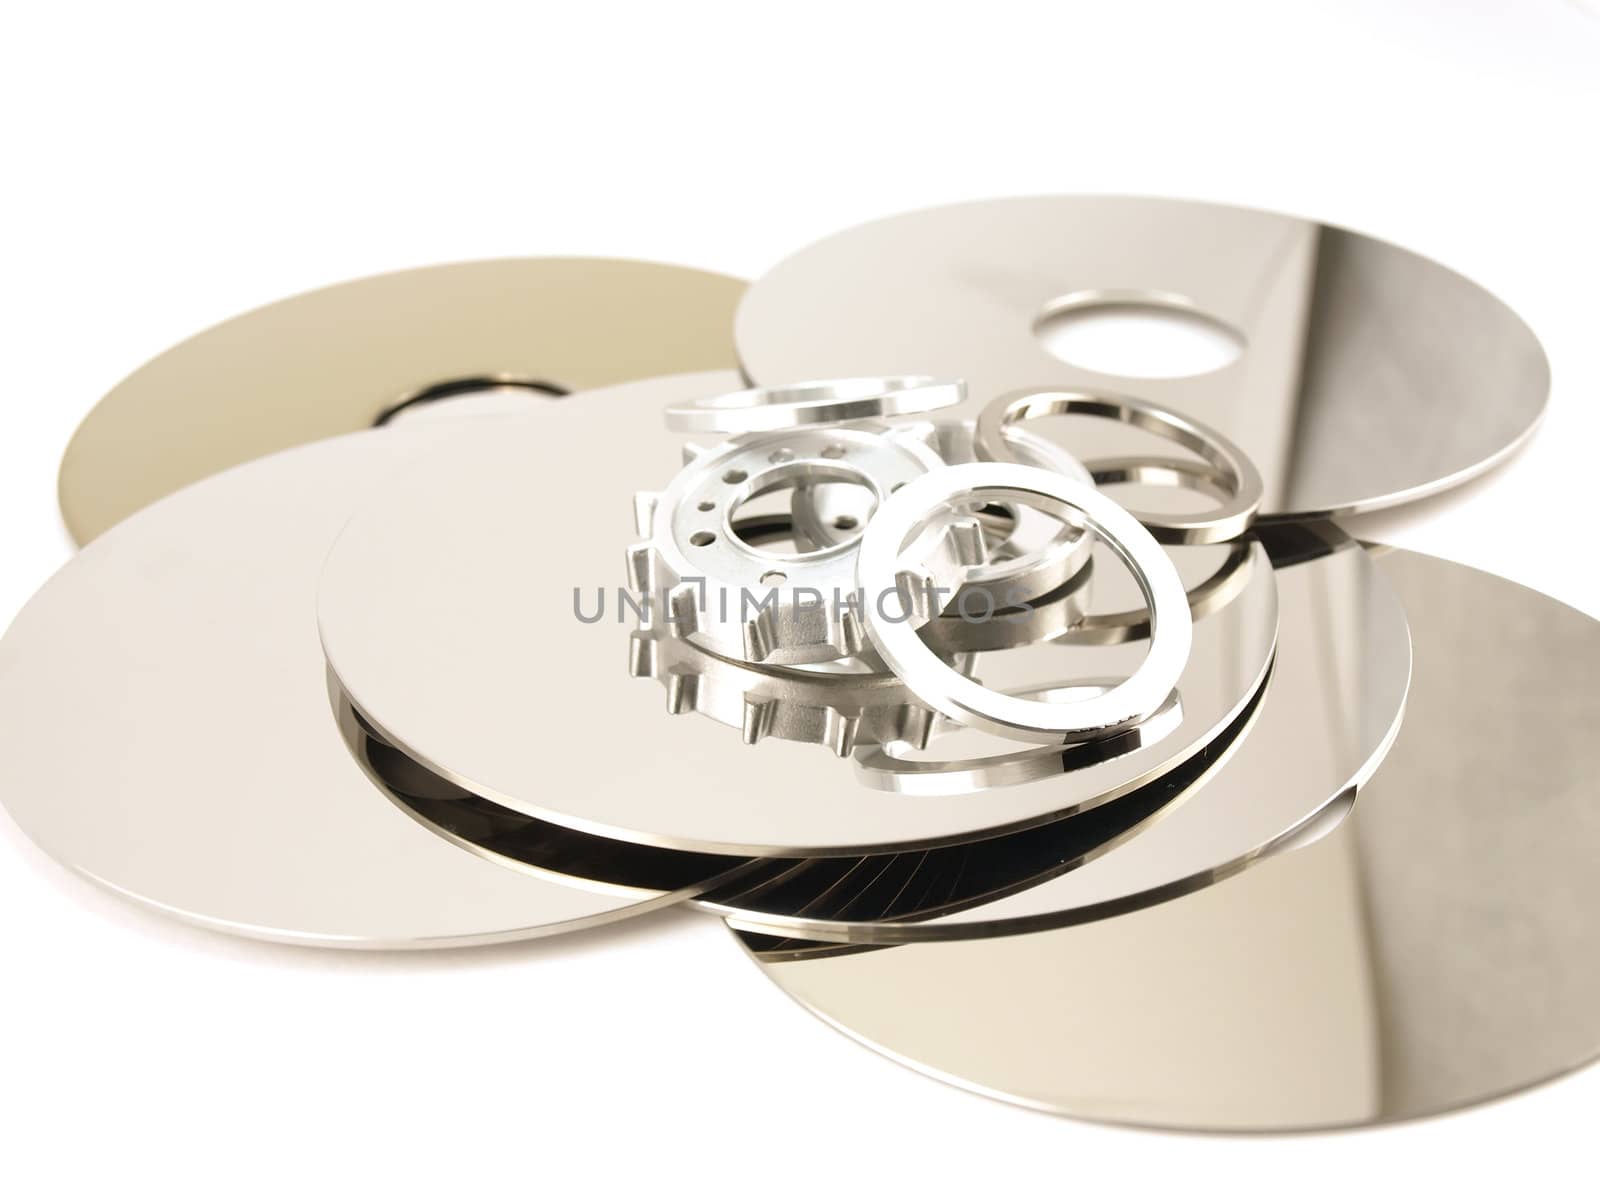 Disks with details of hard drive